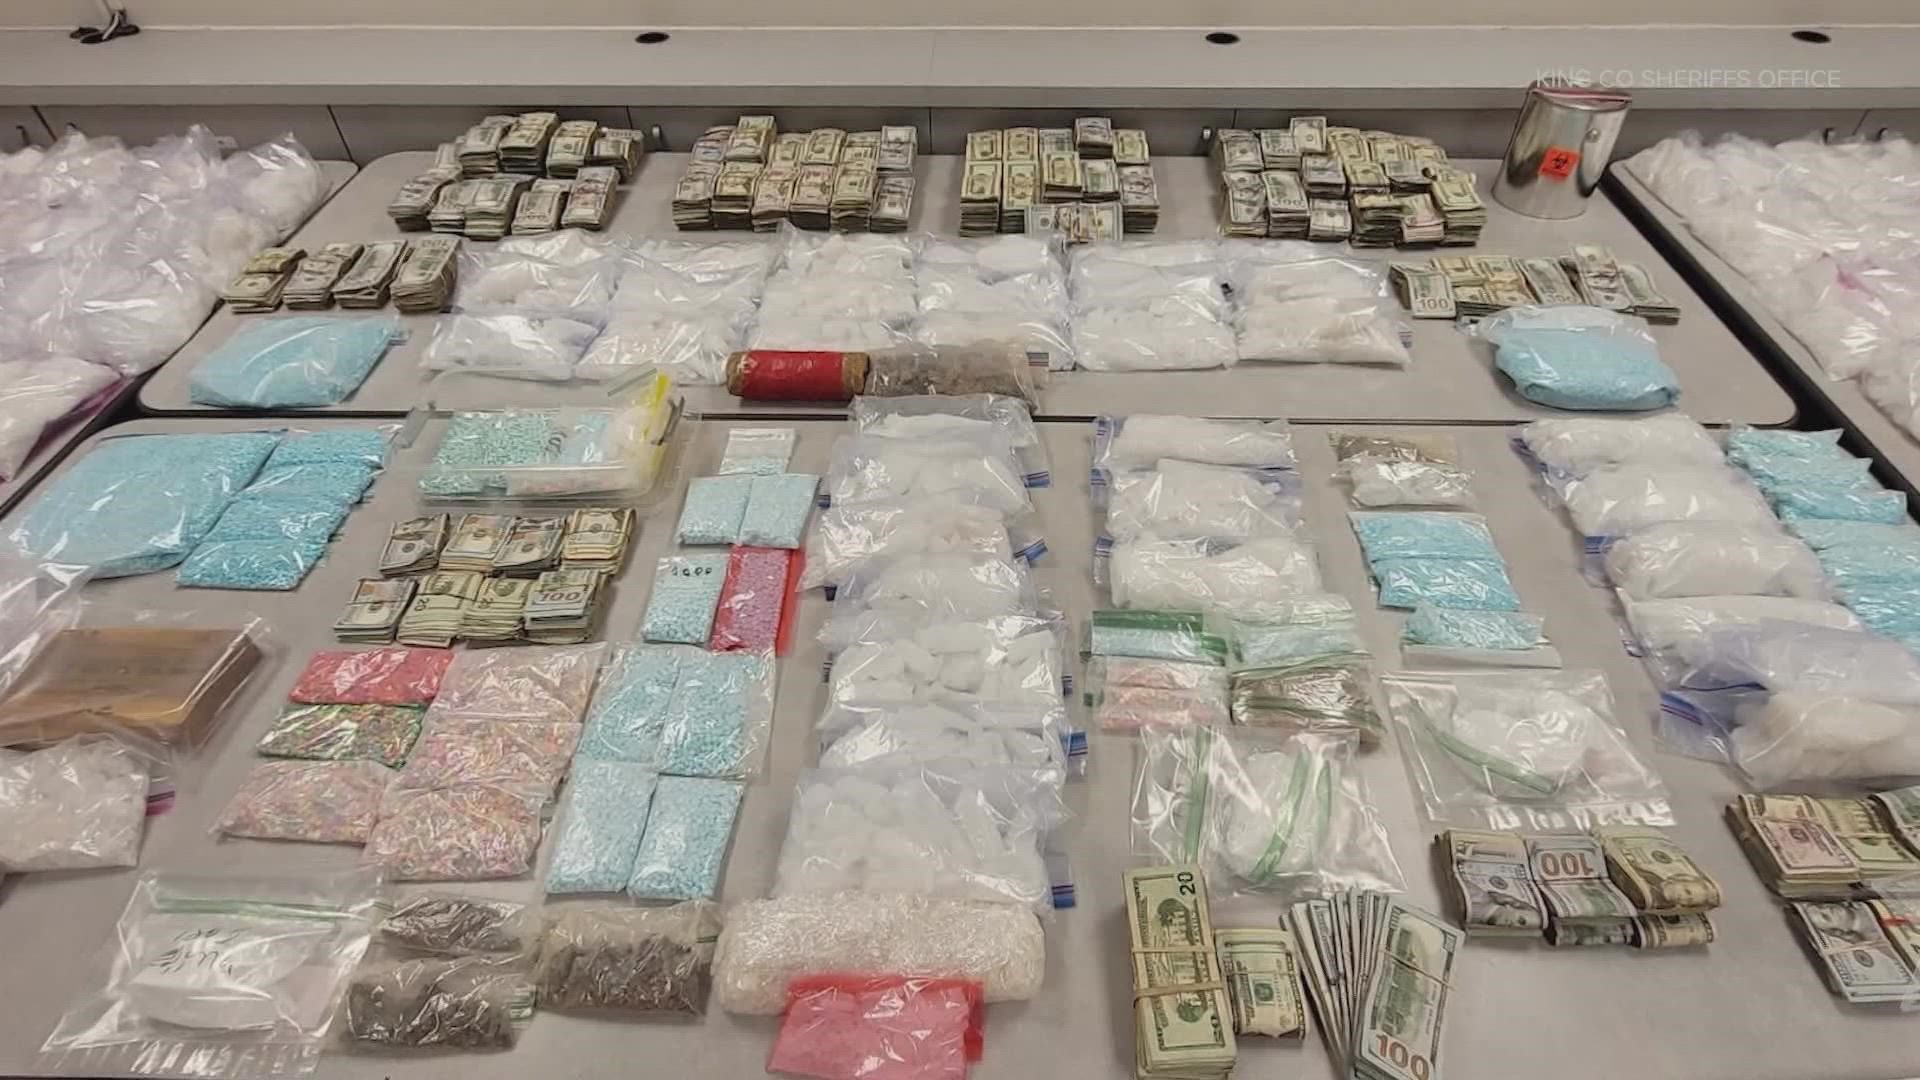 King County Sheriff’s Office recently conducted one of agency’s largest drug busts.